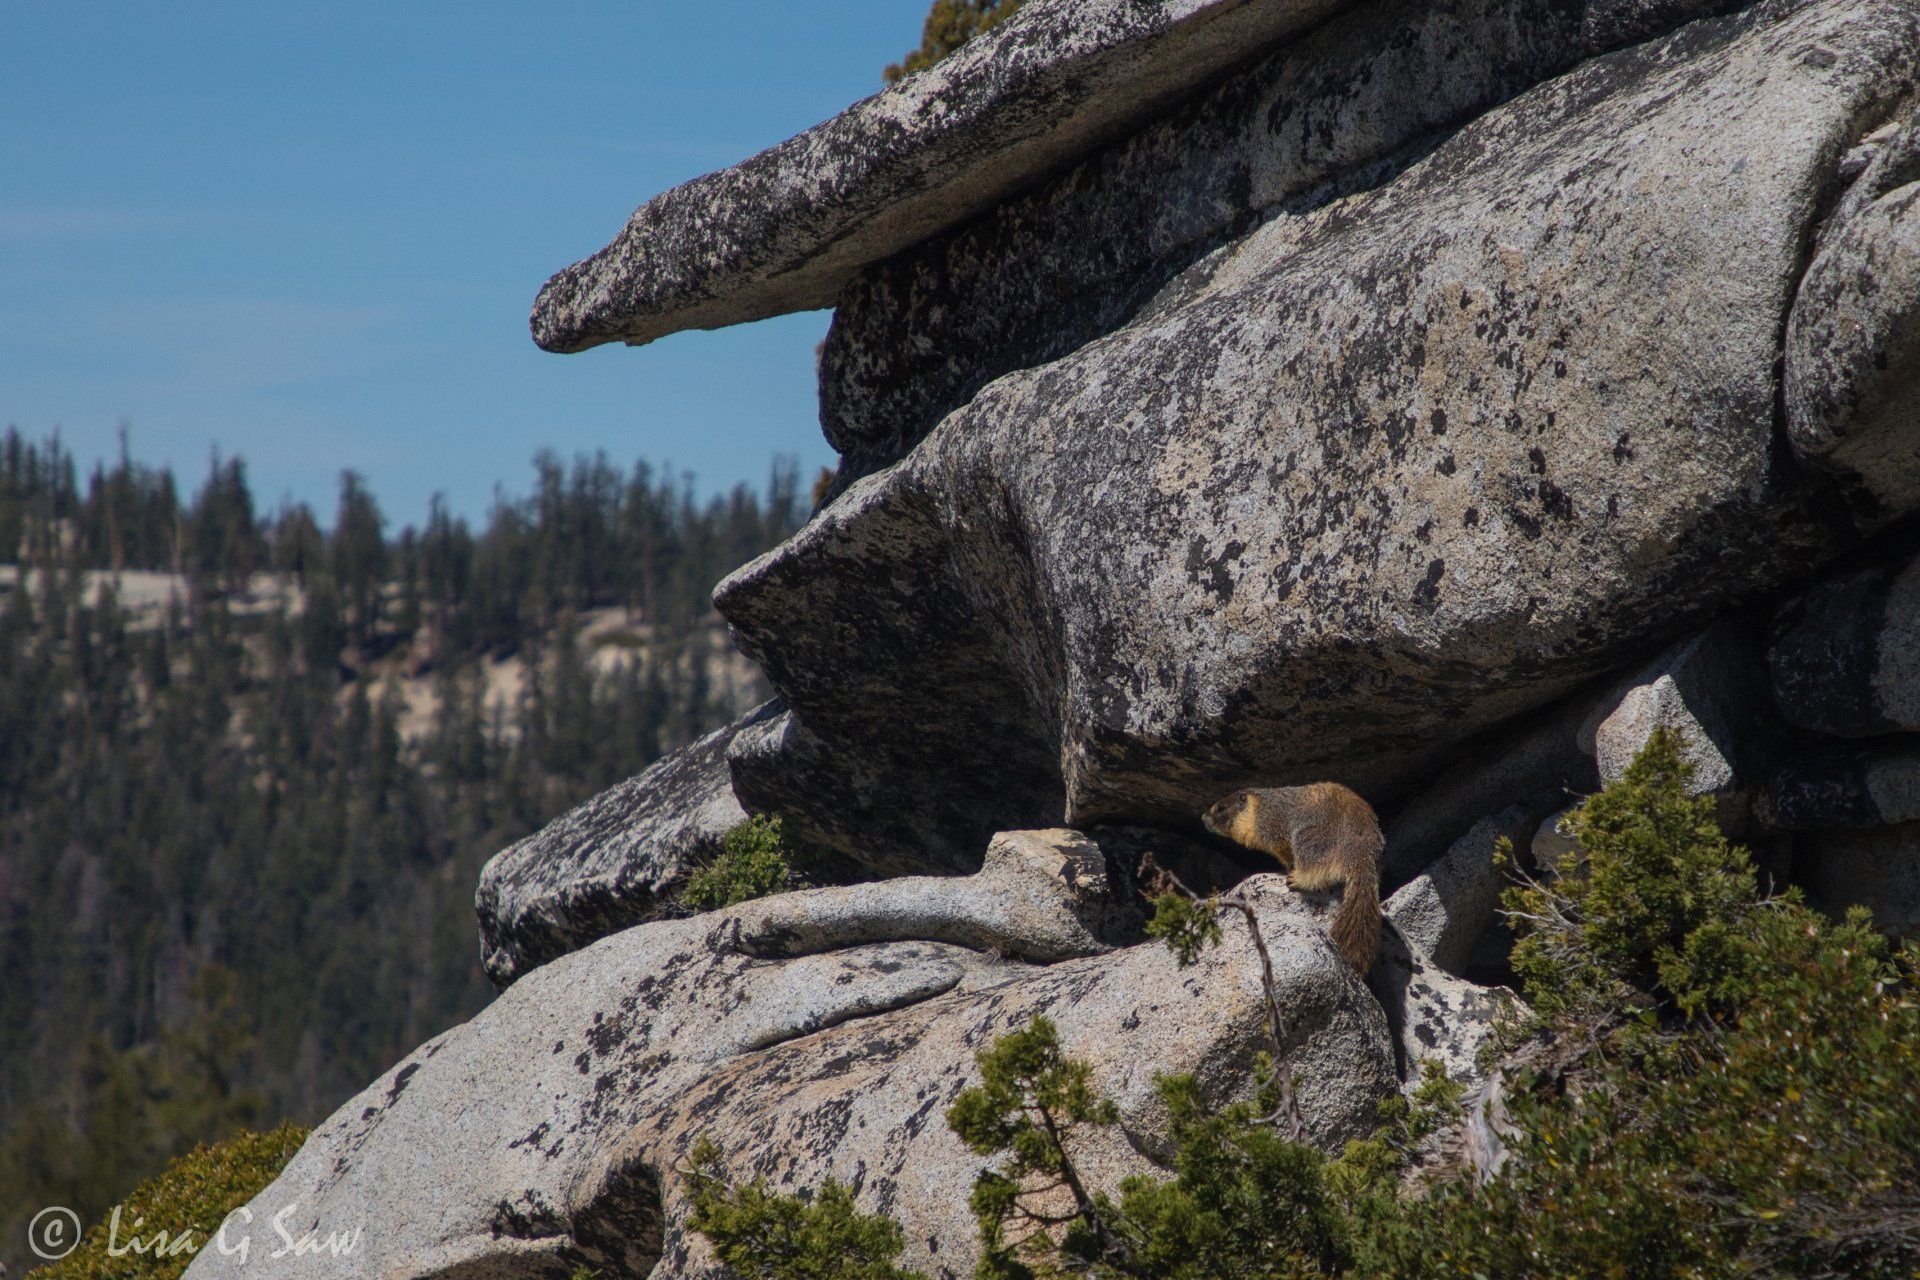 Yellow-Bellied Marmot on rocks at Olmsted Point